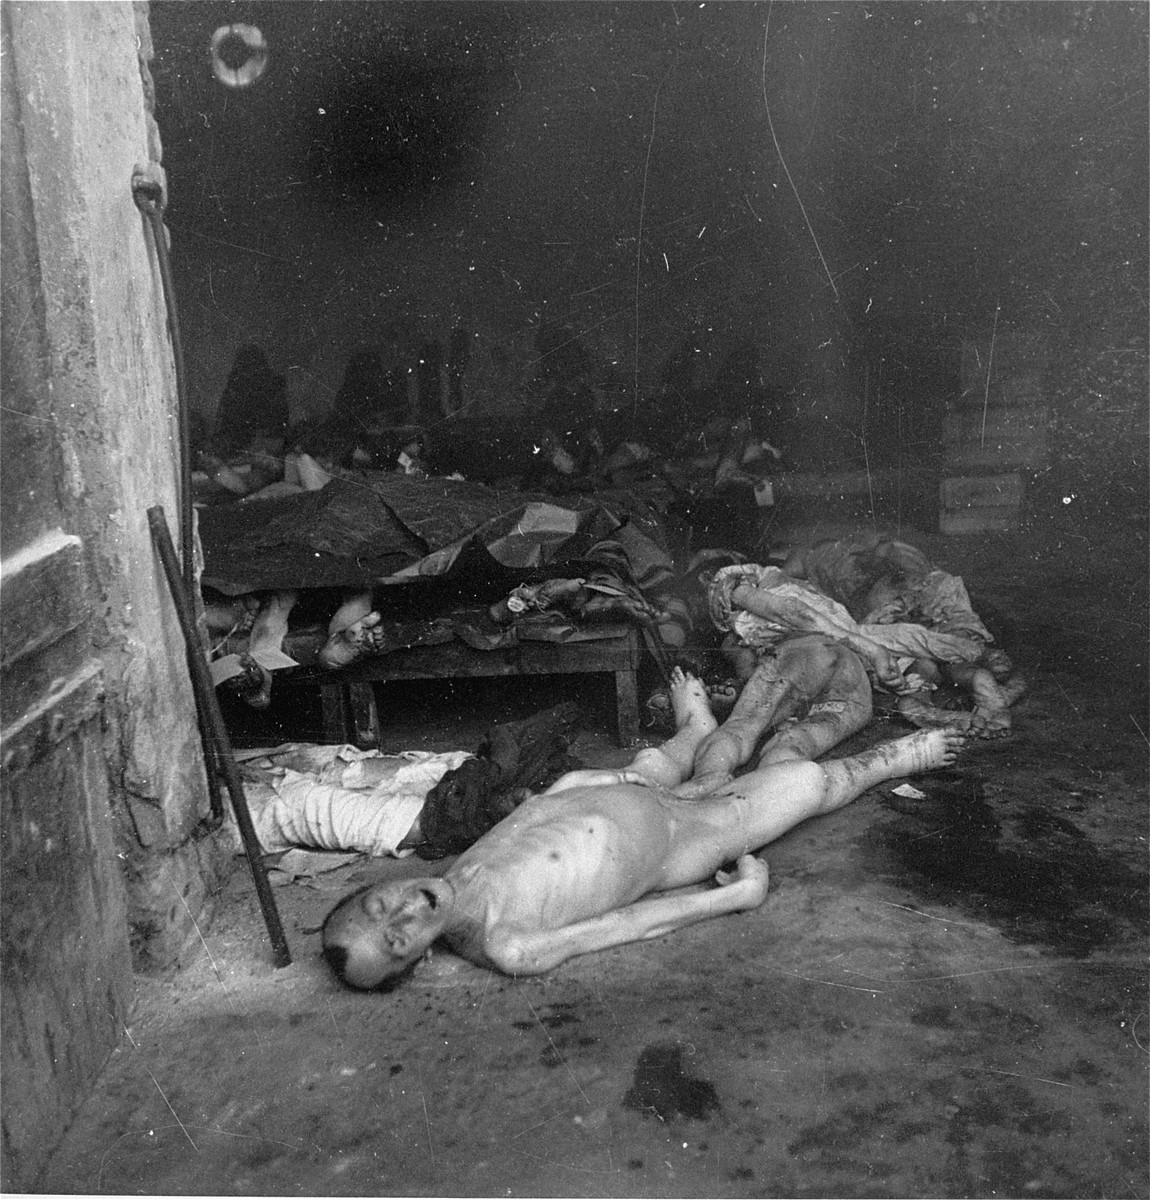 Bodies in the morgue of the Jewish cemetery on Okopowa Street in the Warsaw ghetto.  

Joest's caption reads: "In this morgue there were flecks of blood on the floor and many of the corpses were splashed with blood.  In the dark, however, I could not tell if there was evidence of shooting."